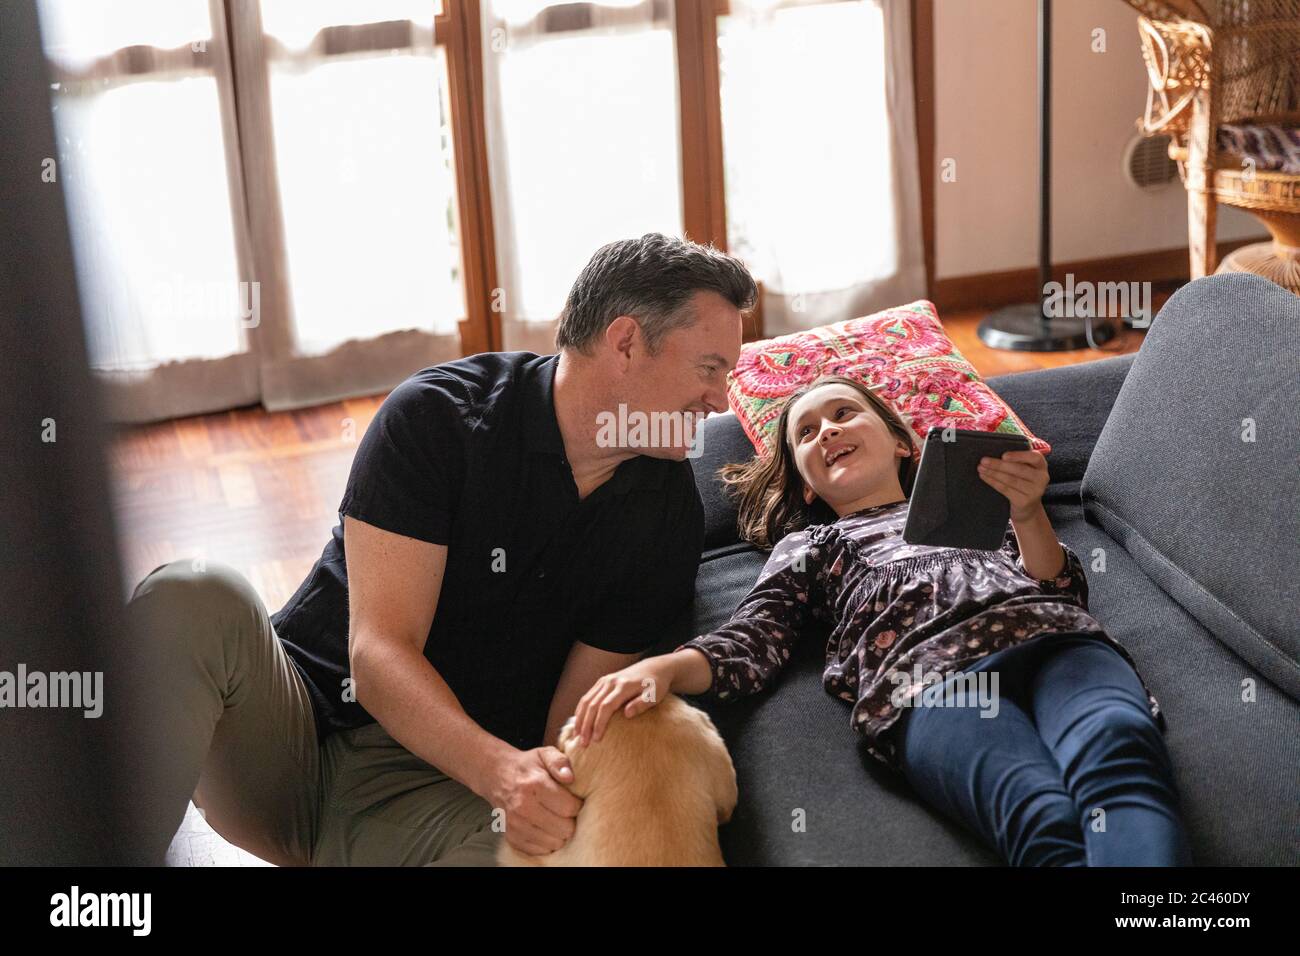 Father and daughter on living room sofa during Coronavirus lockdown. Stock Photo